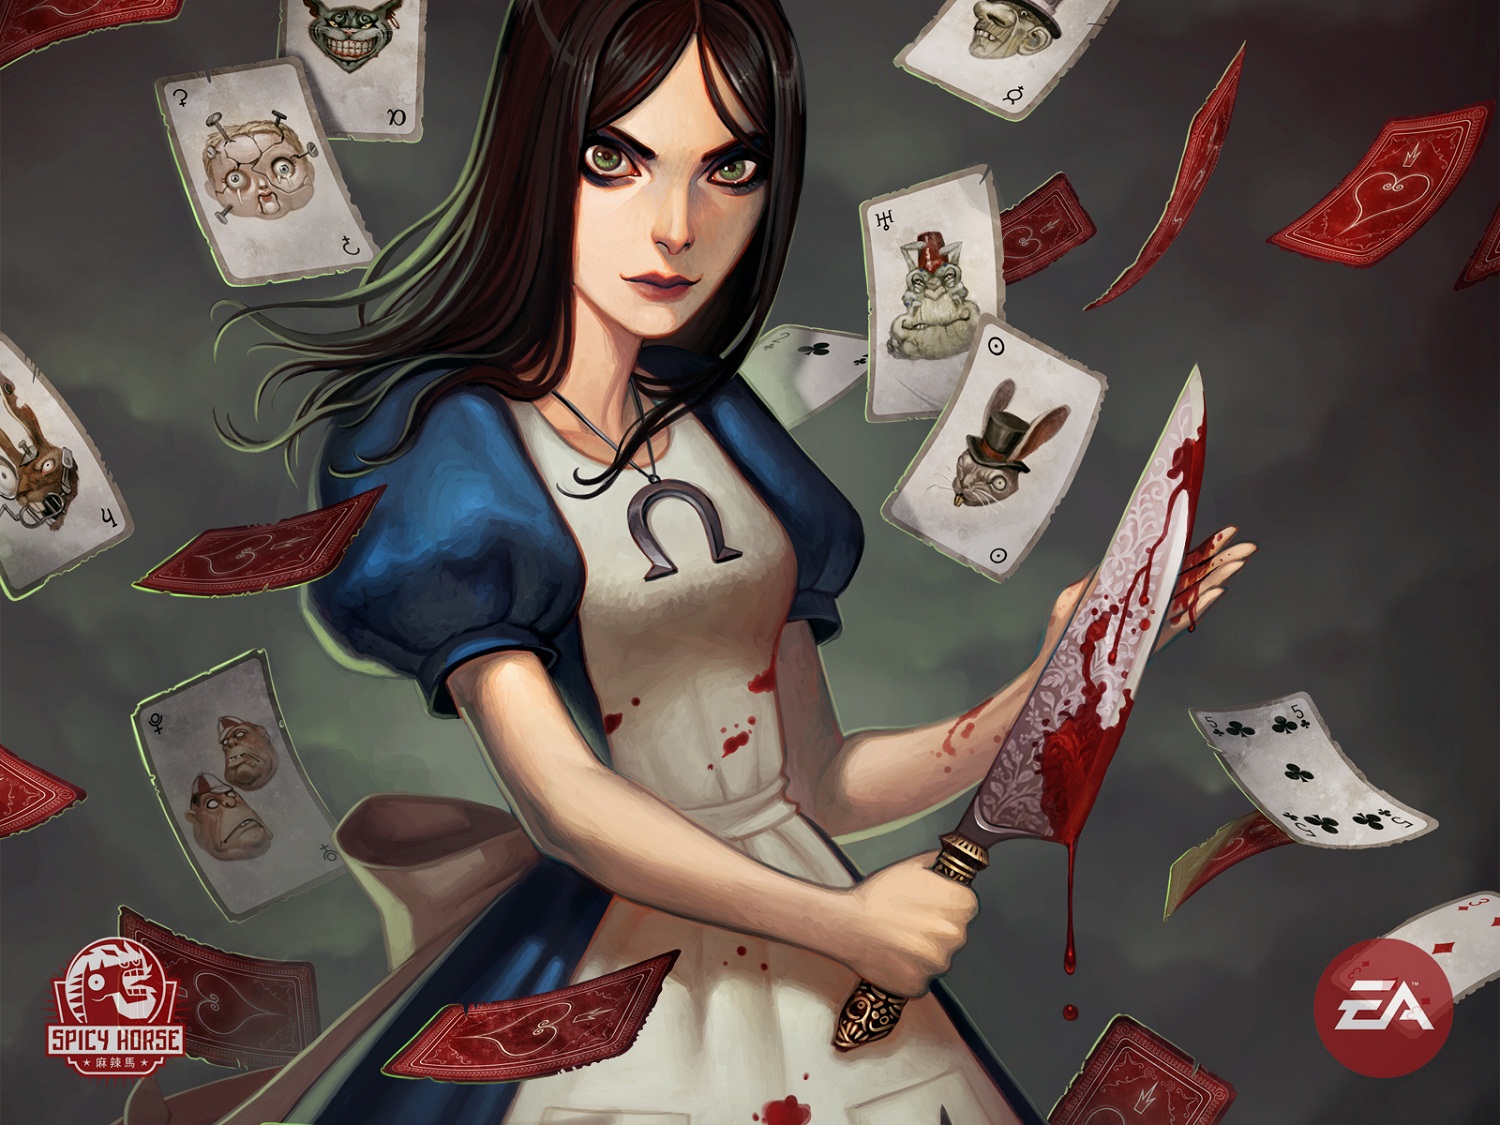 Make a third American McGee's Alice game: Alice in Otherland